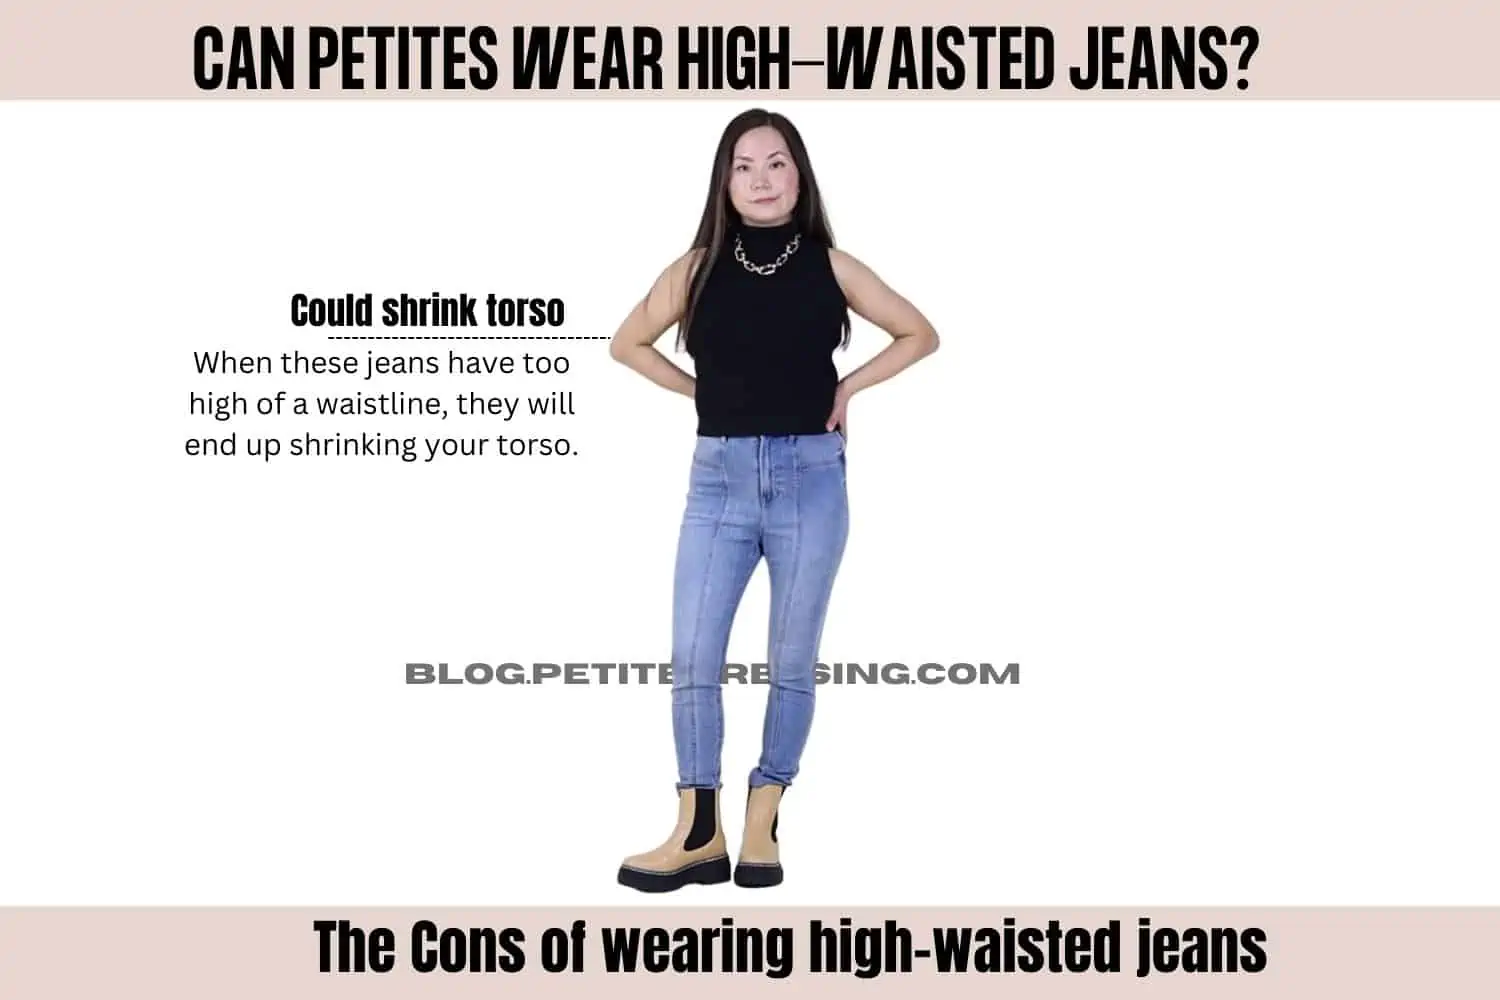 https://blog.petitedressing.com/wp-content/uploads/2022/12/The-Cons-of-wearing-high-waisted-jeans.webp